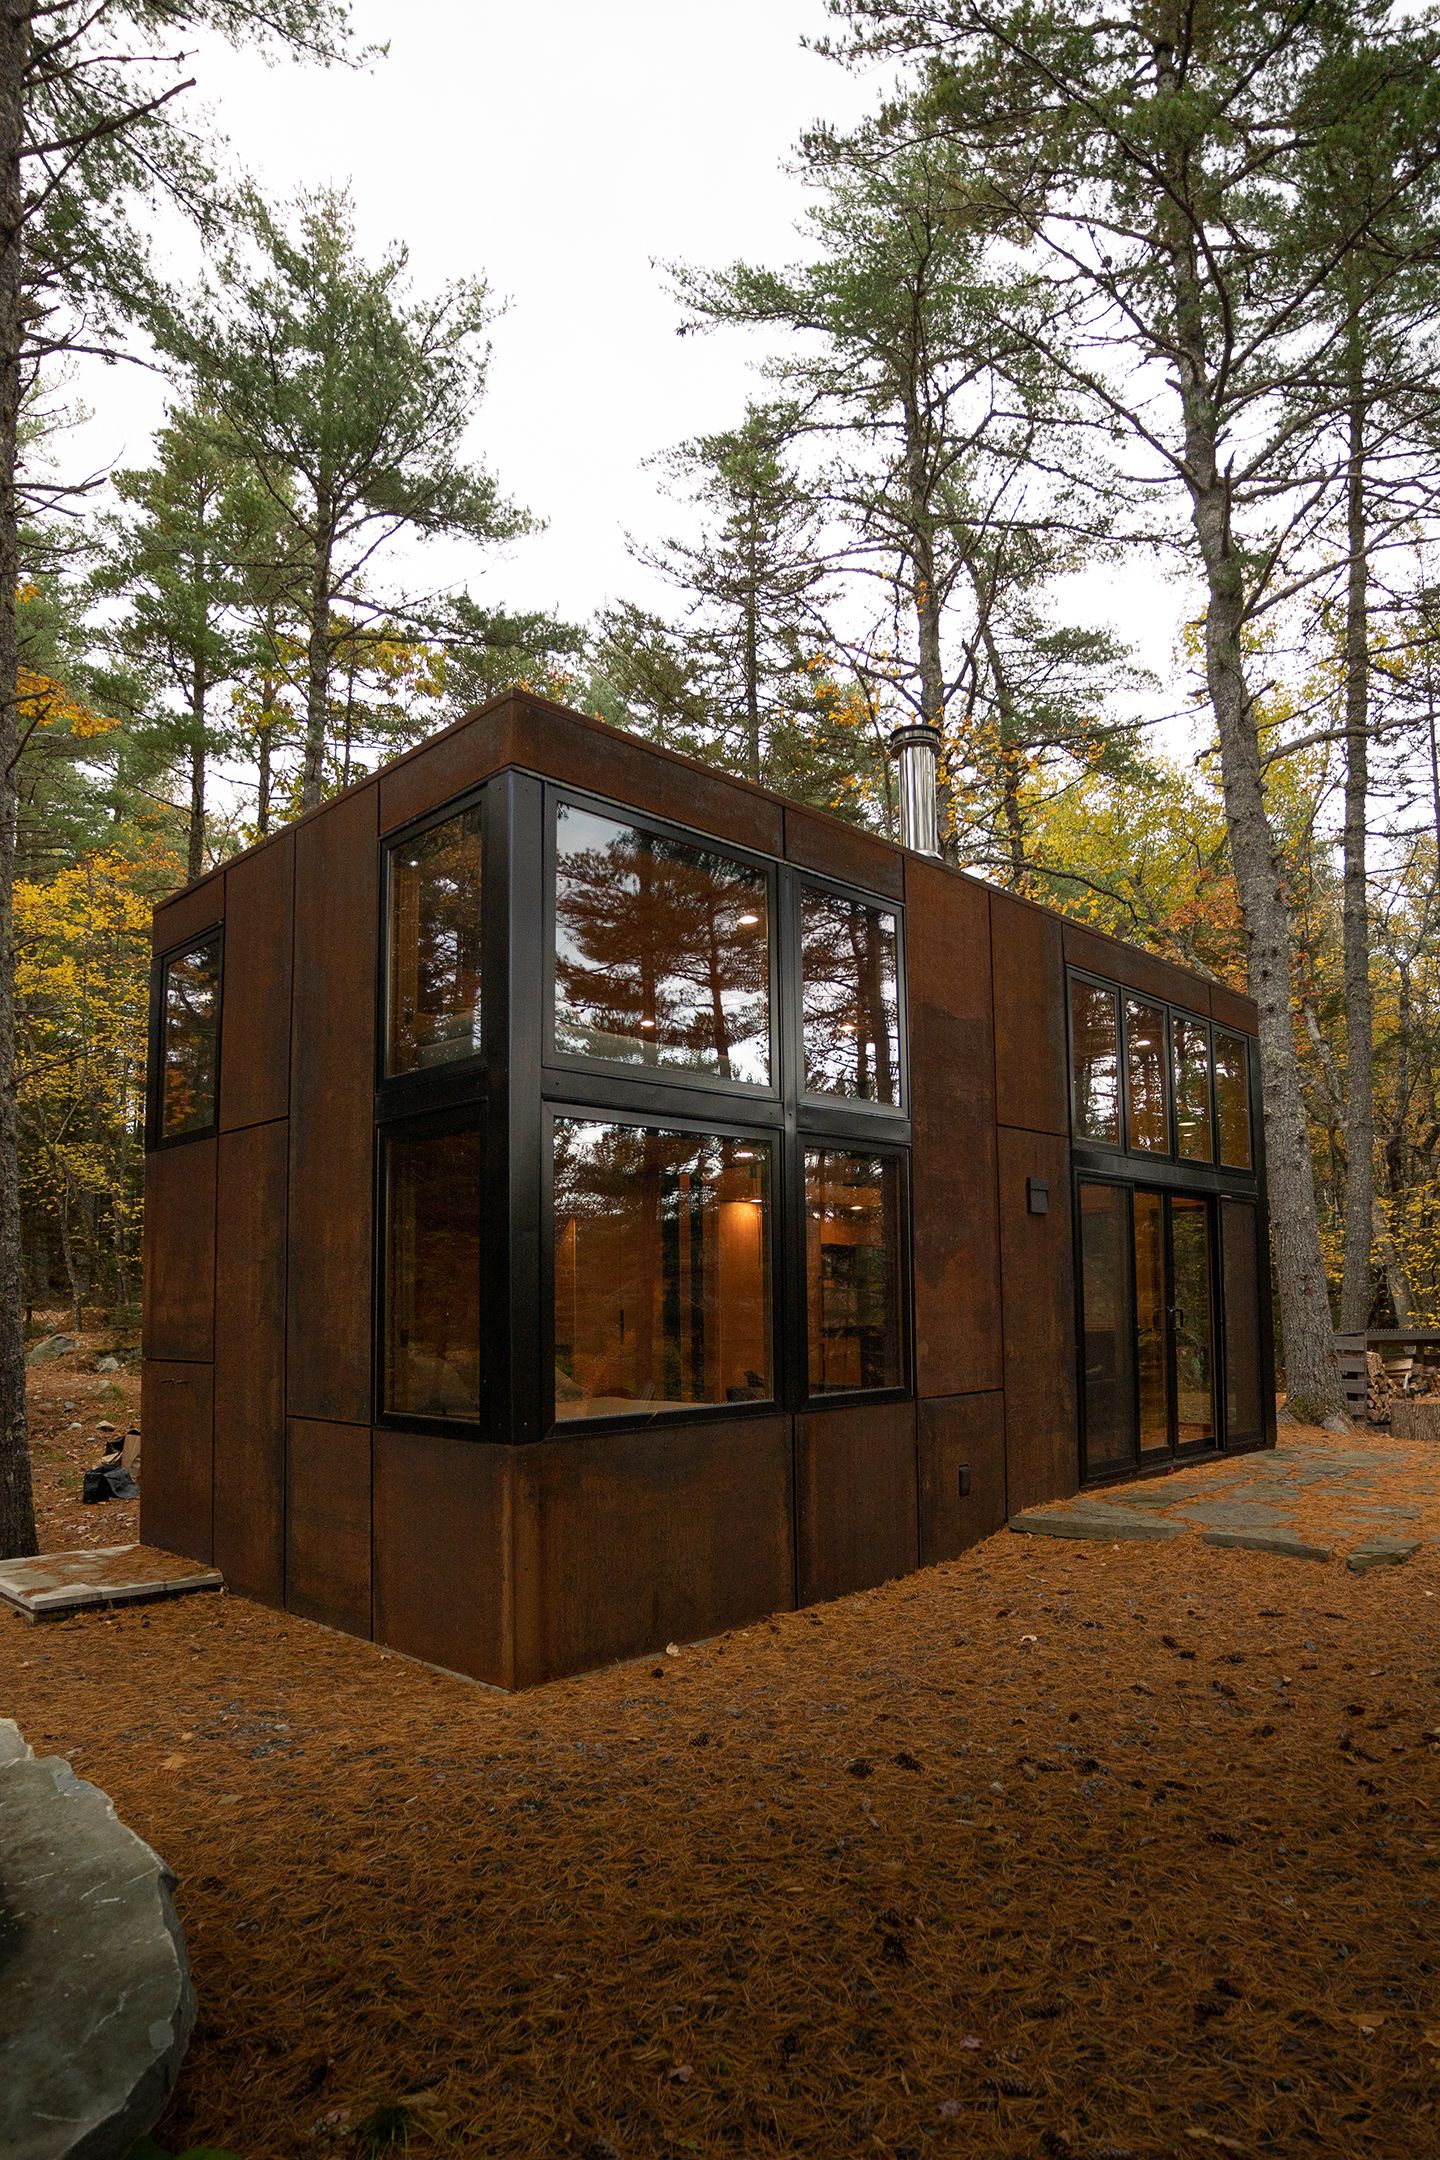 Tiny Homes You Can Buy on  - Dwell